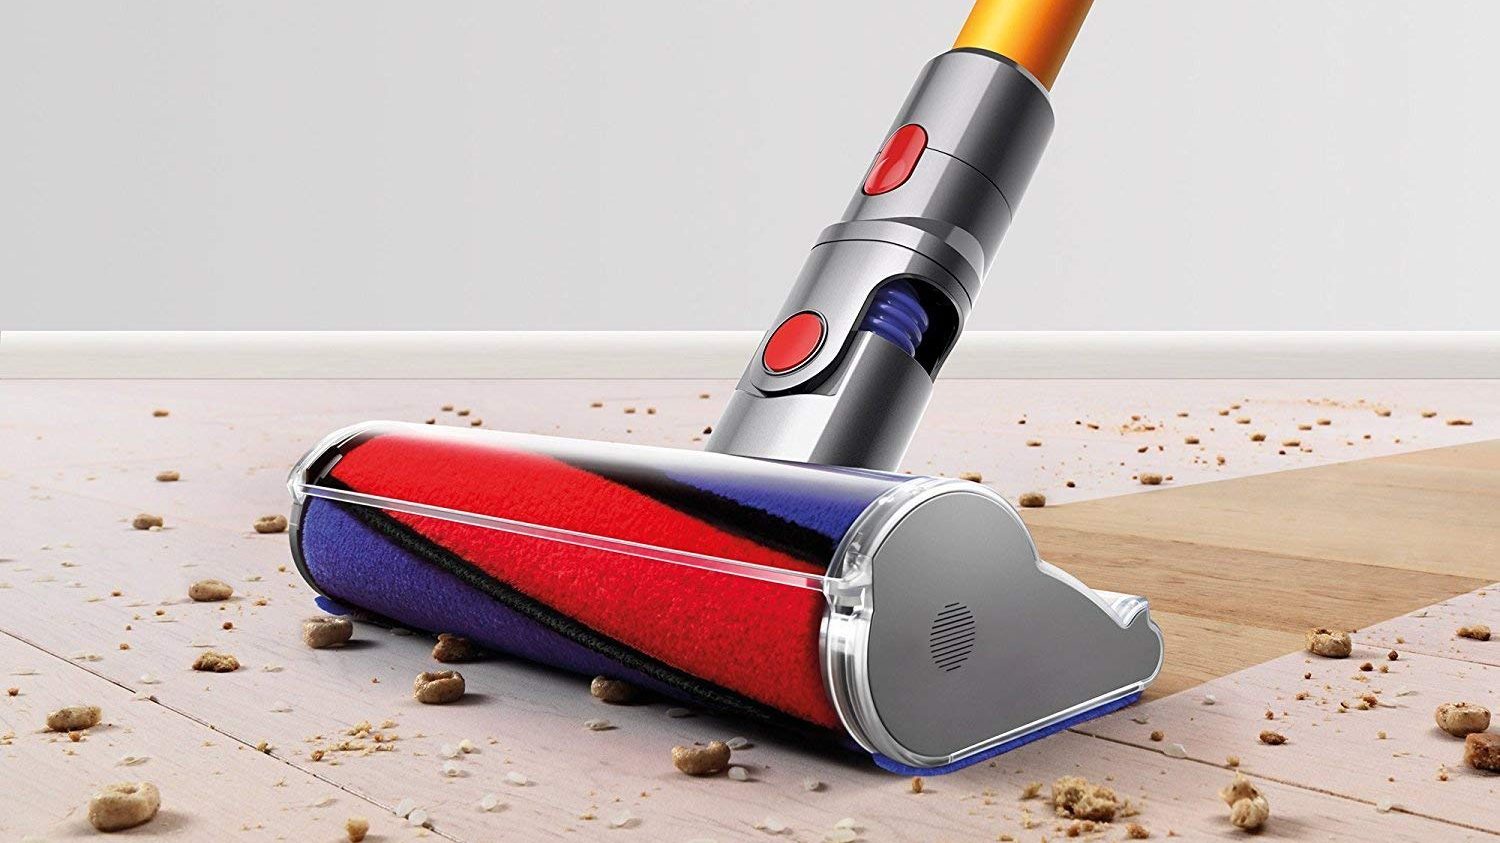 Woot! is letting you feast on deals for Dyson devices this Thanksgiving